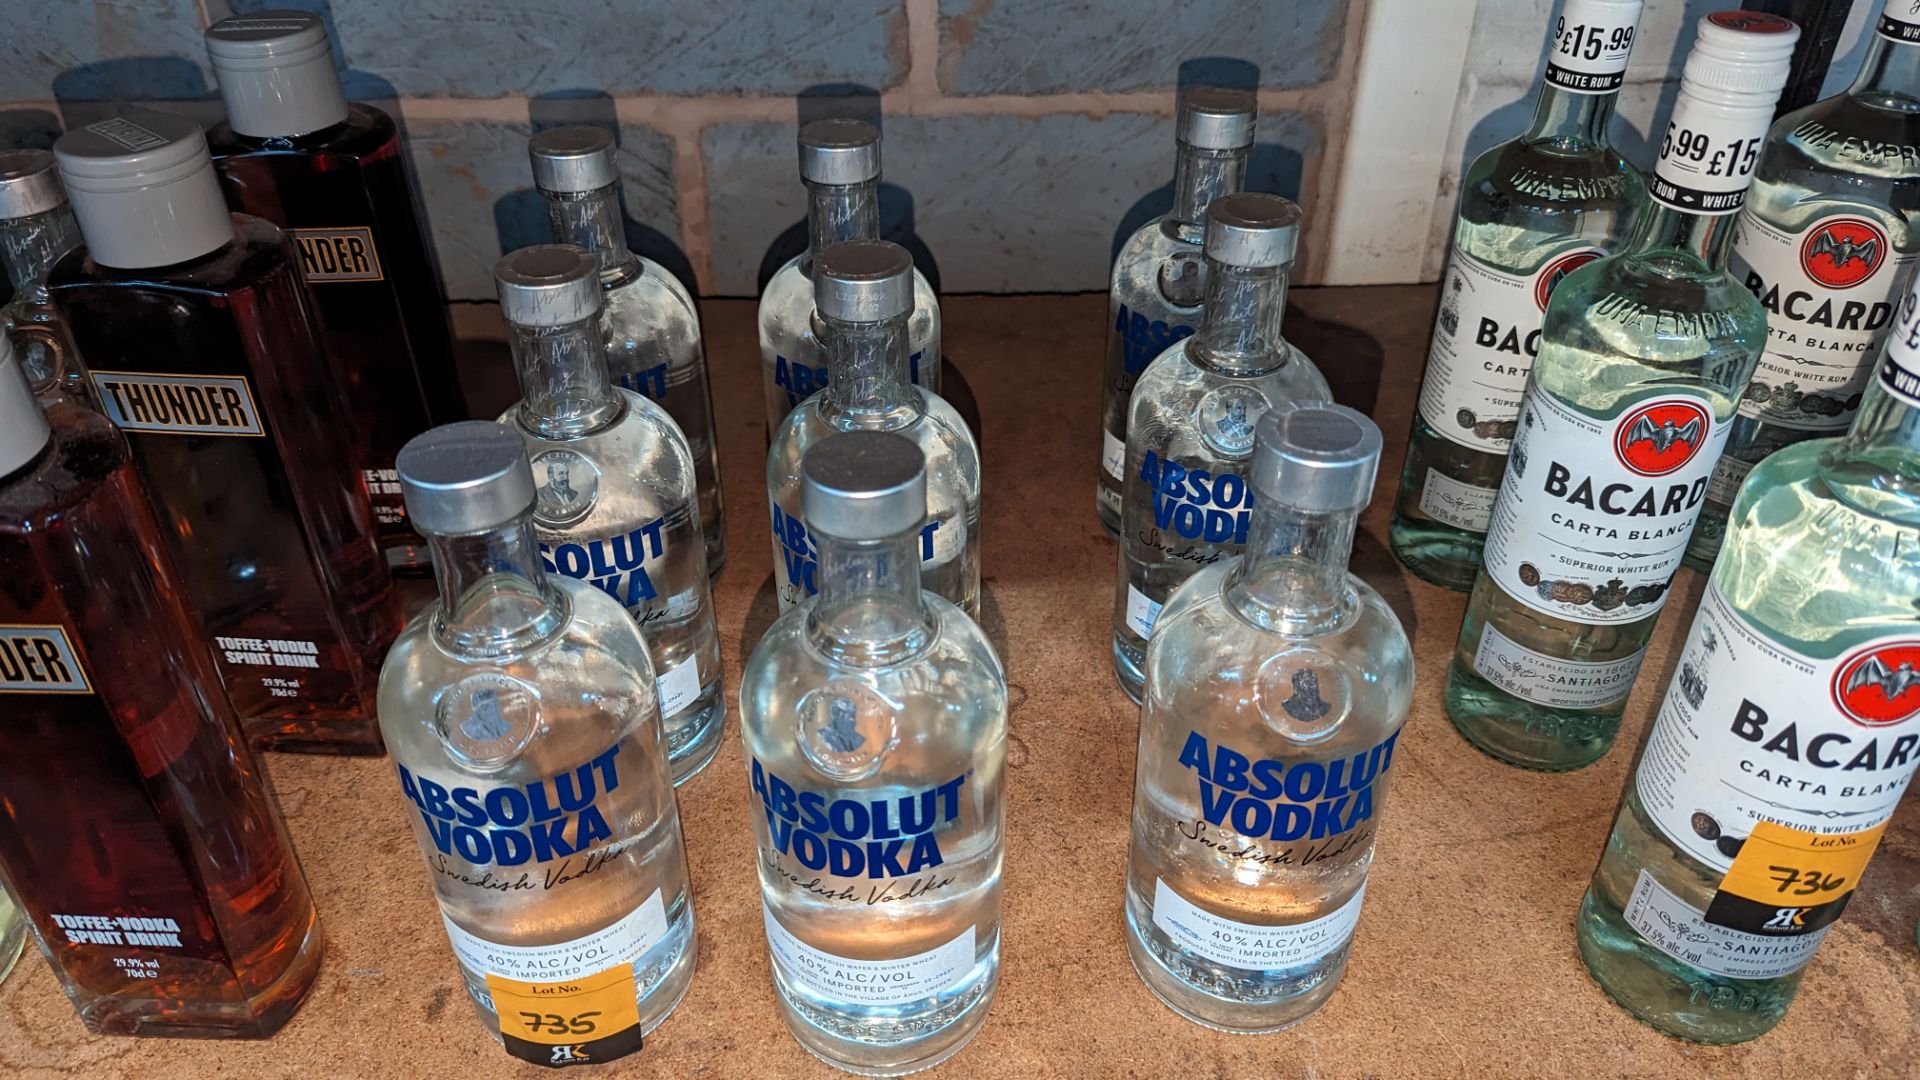 9 bottles of Absolut vodka sold under AWRS number XQAW00000101017 - Image 2 of 5